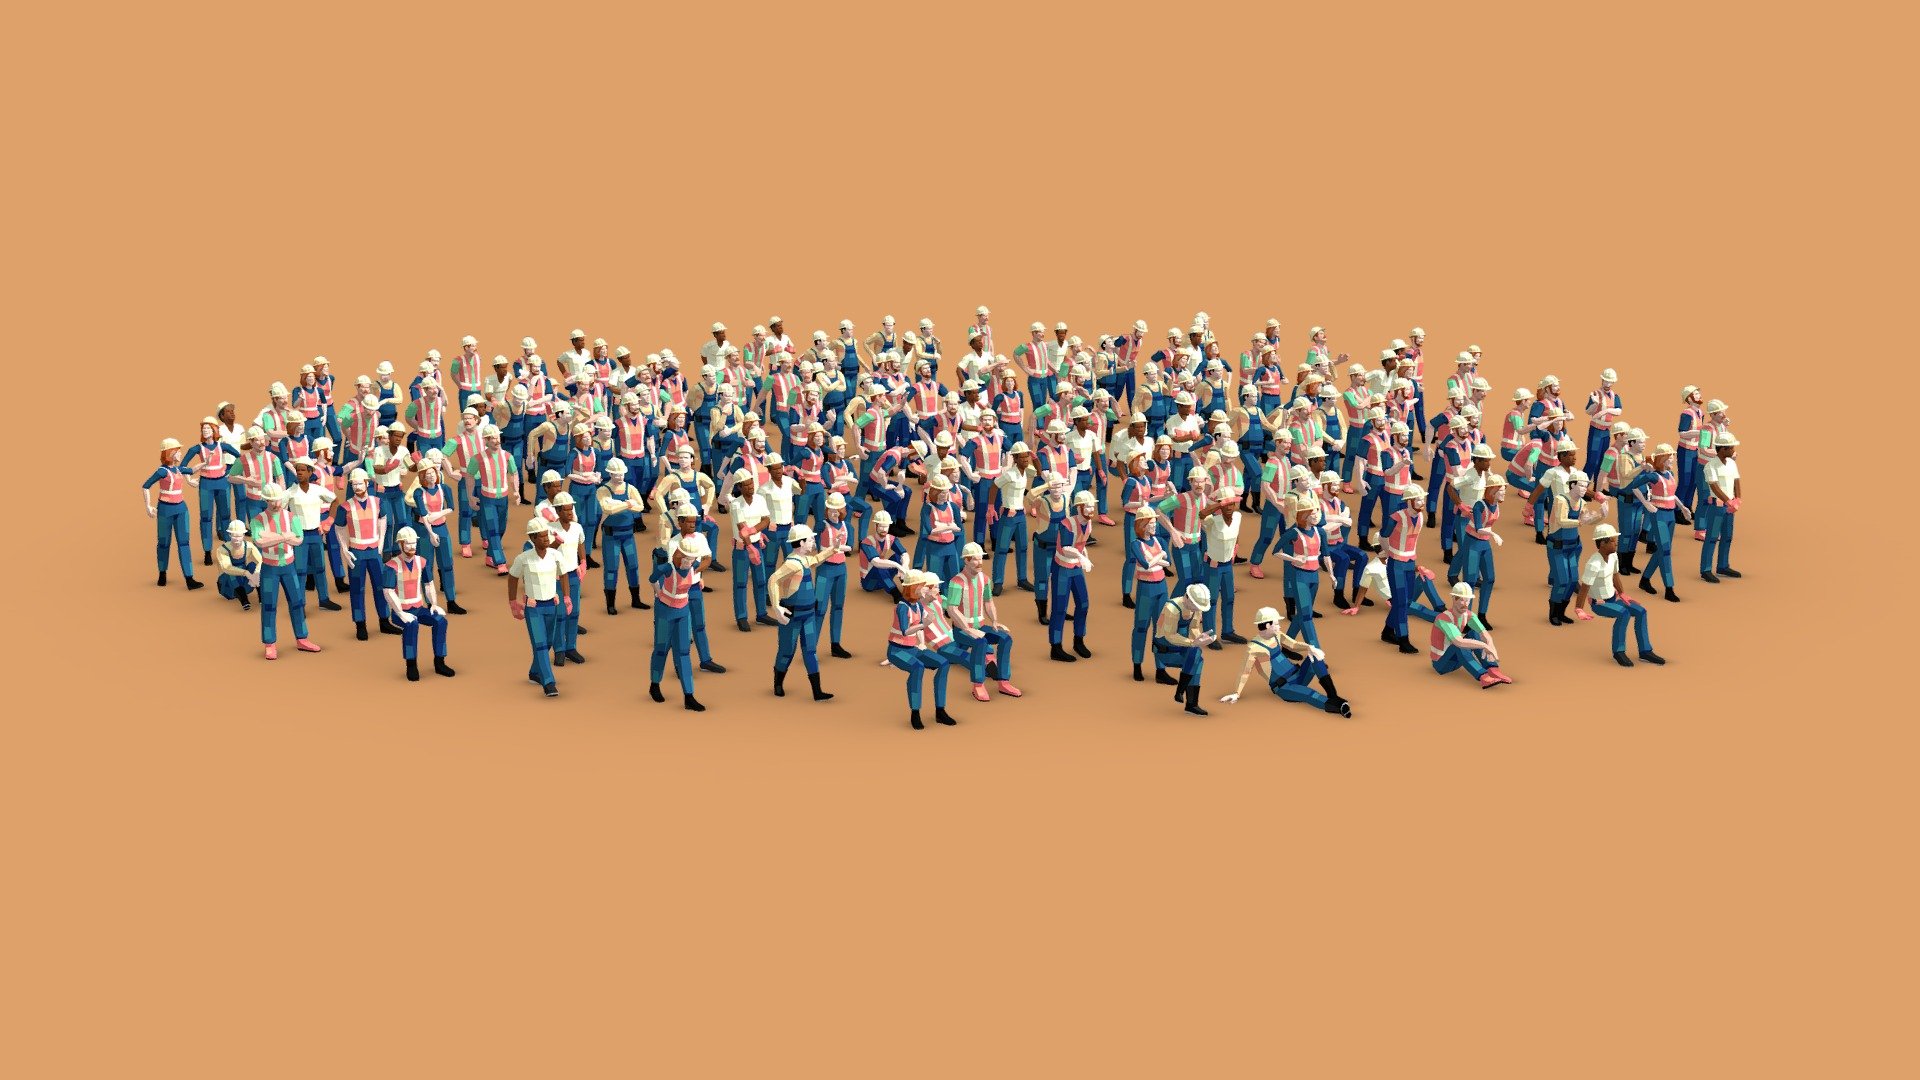 Crafted from 5 unique construction worker characters and 40 poses, this pack is specifically tailored for construction scenes. Though they can all share a single texture, 21 additional texture variants are included, allowing quick changes in color styles. Each character averages 1,000 polygons (or 2,000 triangles).

Ideal for architectural visualizations and graphic design!

Files are conveniently organized in two ways:




5 scene files, each containing 40 poses.

200 individual files, one for each pose, with meaningful filenames to identify characters and poses.

Available in MAX, FBX, and OBJ formats.

This pack if subset of: 4,000 Posed People Ultimate for ArchViz

See also the rigged characters for animations and games: Low Poly Construction Workers - 200 Posed Construction Workers Low-Poly Style - Buy Royalty Free 3D model by Denys Almaral (@denysalmaral) 3d model